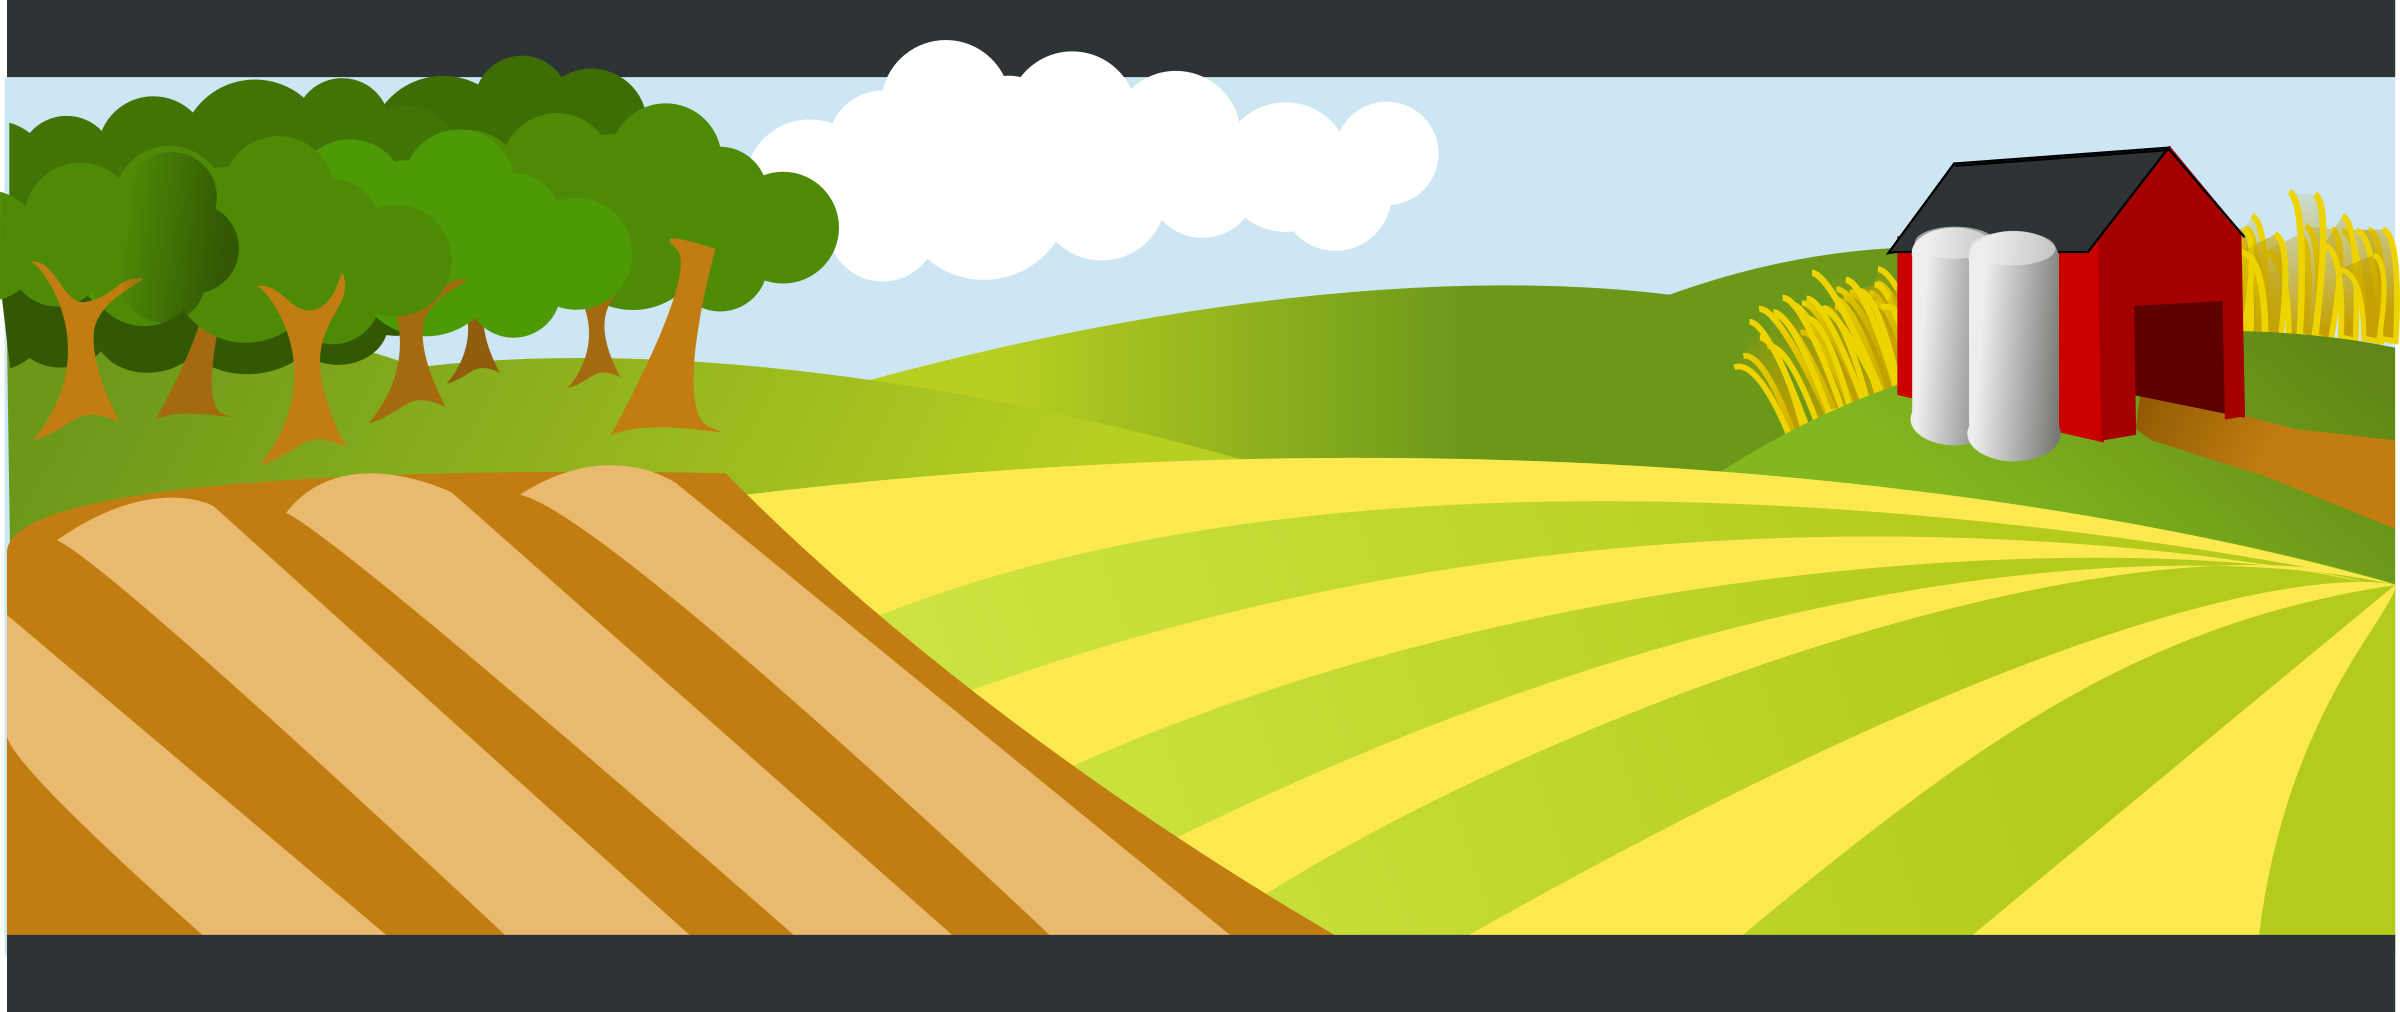 free clipart images agriculture - photo #16